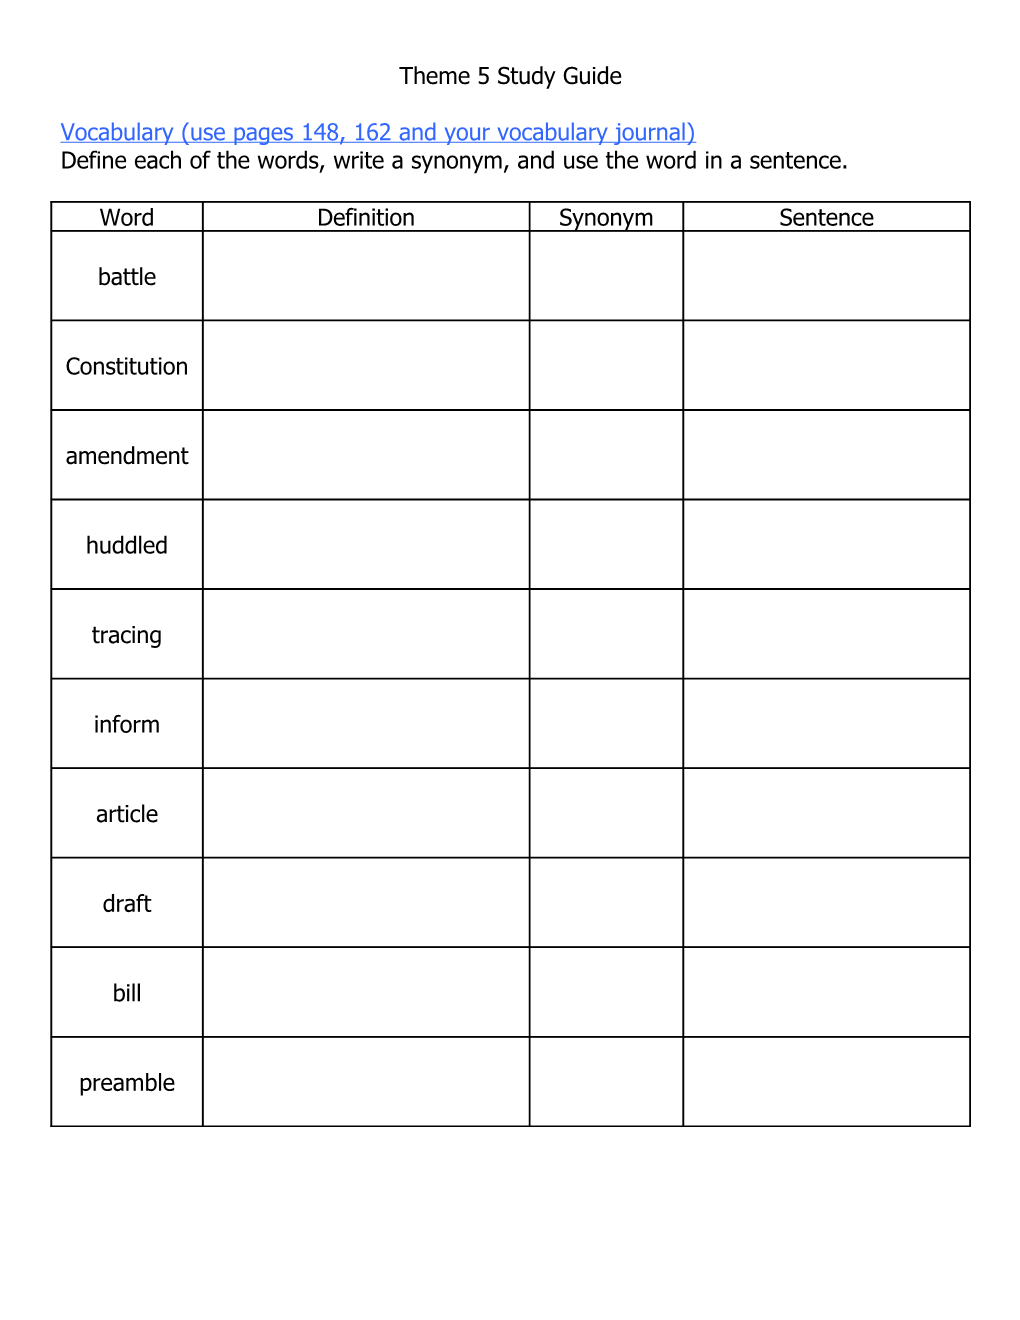 Vocabulary (Use Pages 148, 162 and Your Vocabulary Journal)